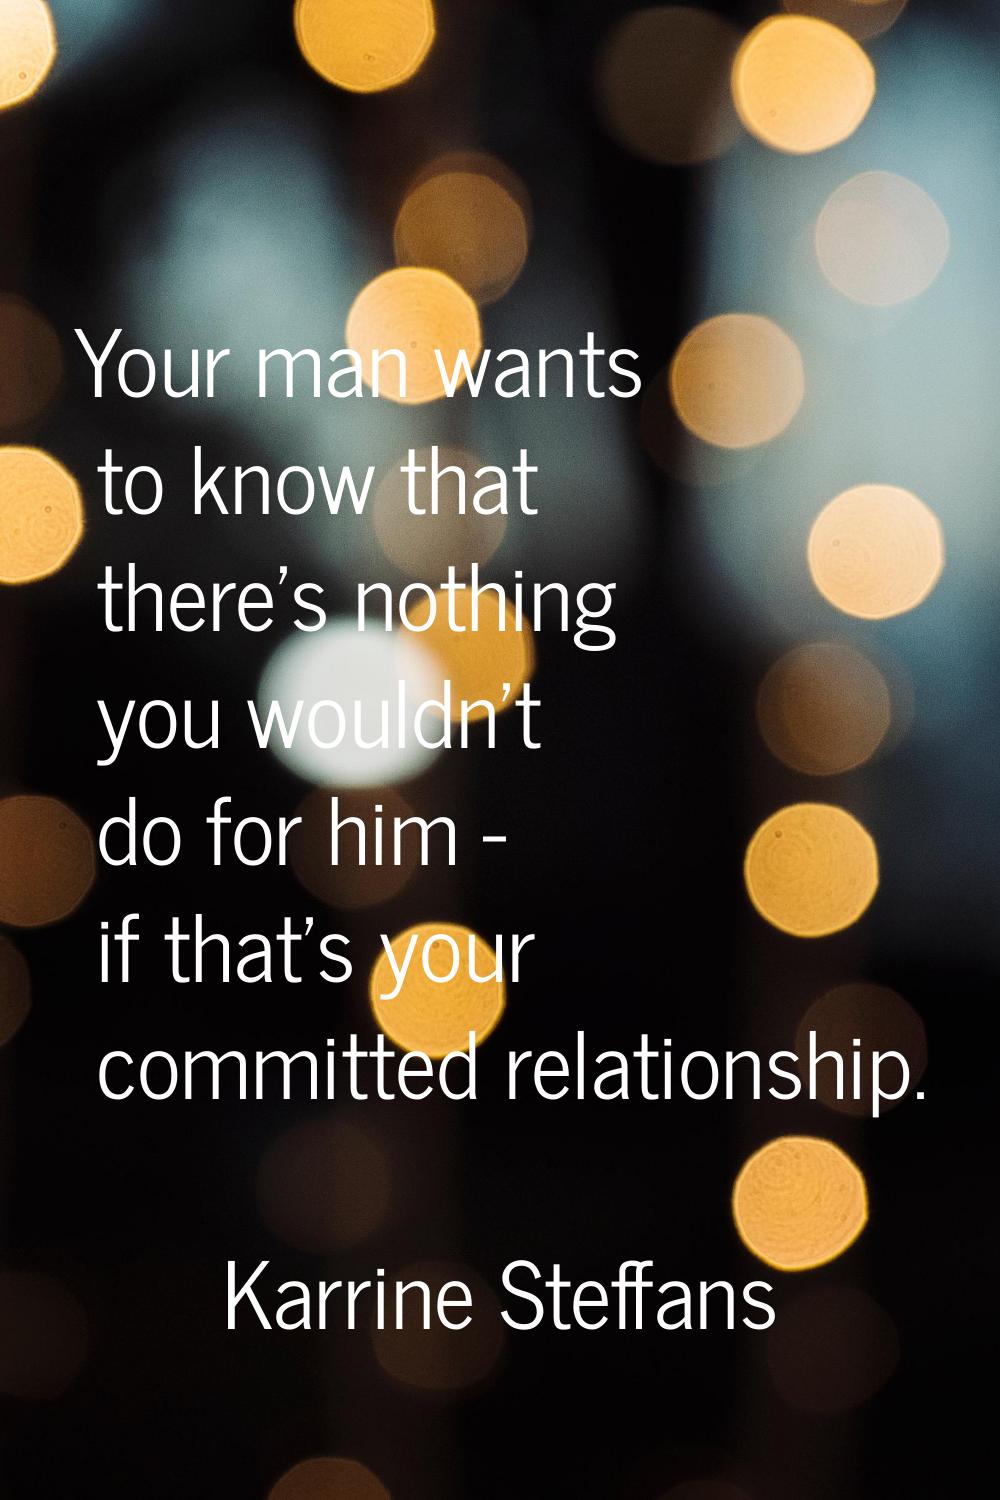 Your man wants to know that there's nothing you wouldn't do for him - if that's your committed rela